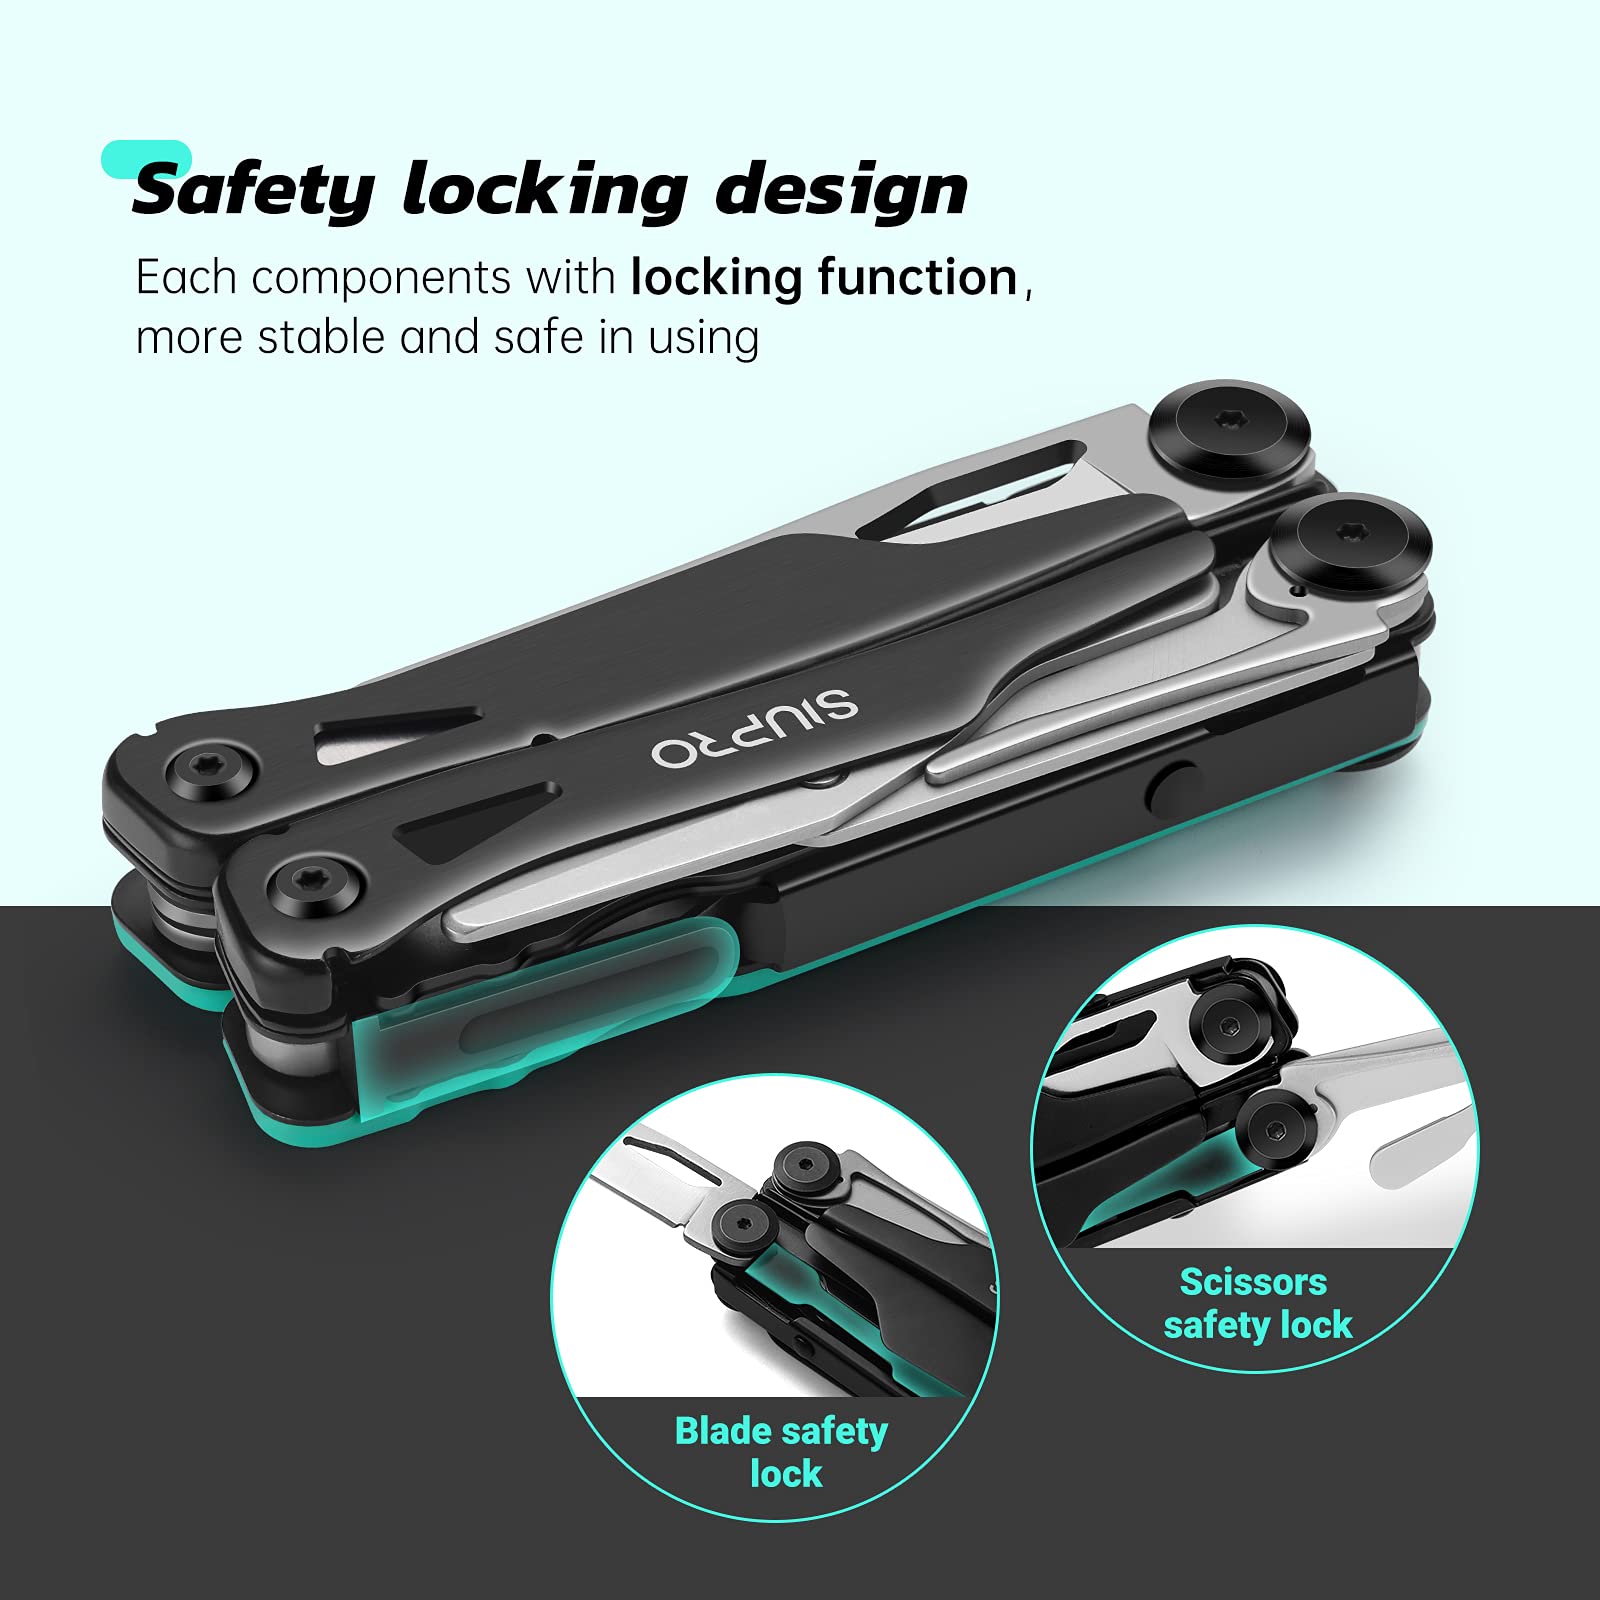 SIUPRO Multitool Pocket Knife, Multi Tool Pliers with Clip for Men and Women, Valentines Day Gifts for Him Boyfriend， Multipurpose Utility Tactical Scissors for Camping, Survival